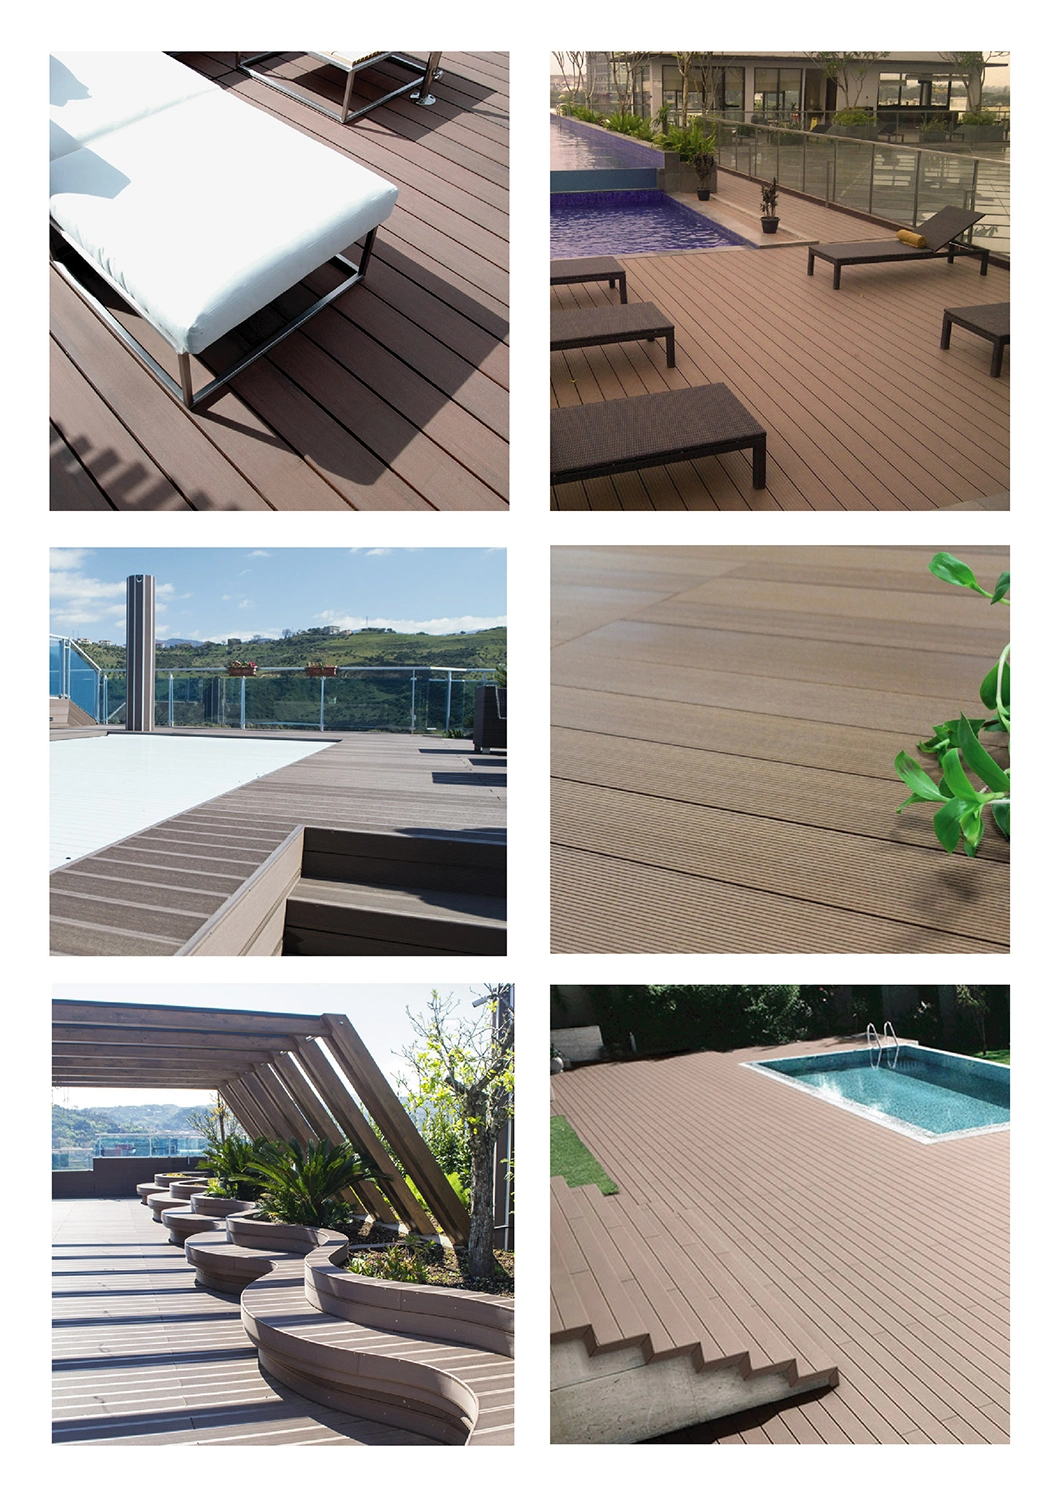 High Performance Durable Ultra Scratch Resistant Wood Plastic Co-Extrusion Seaside Composite Decking Floor